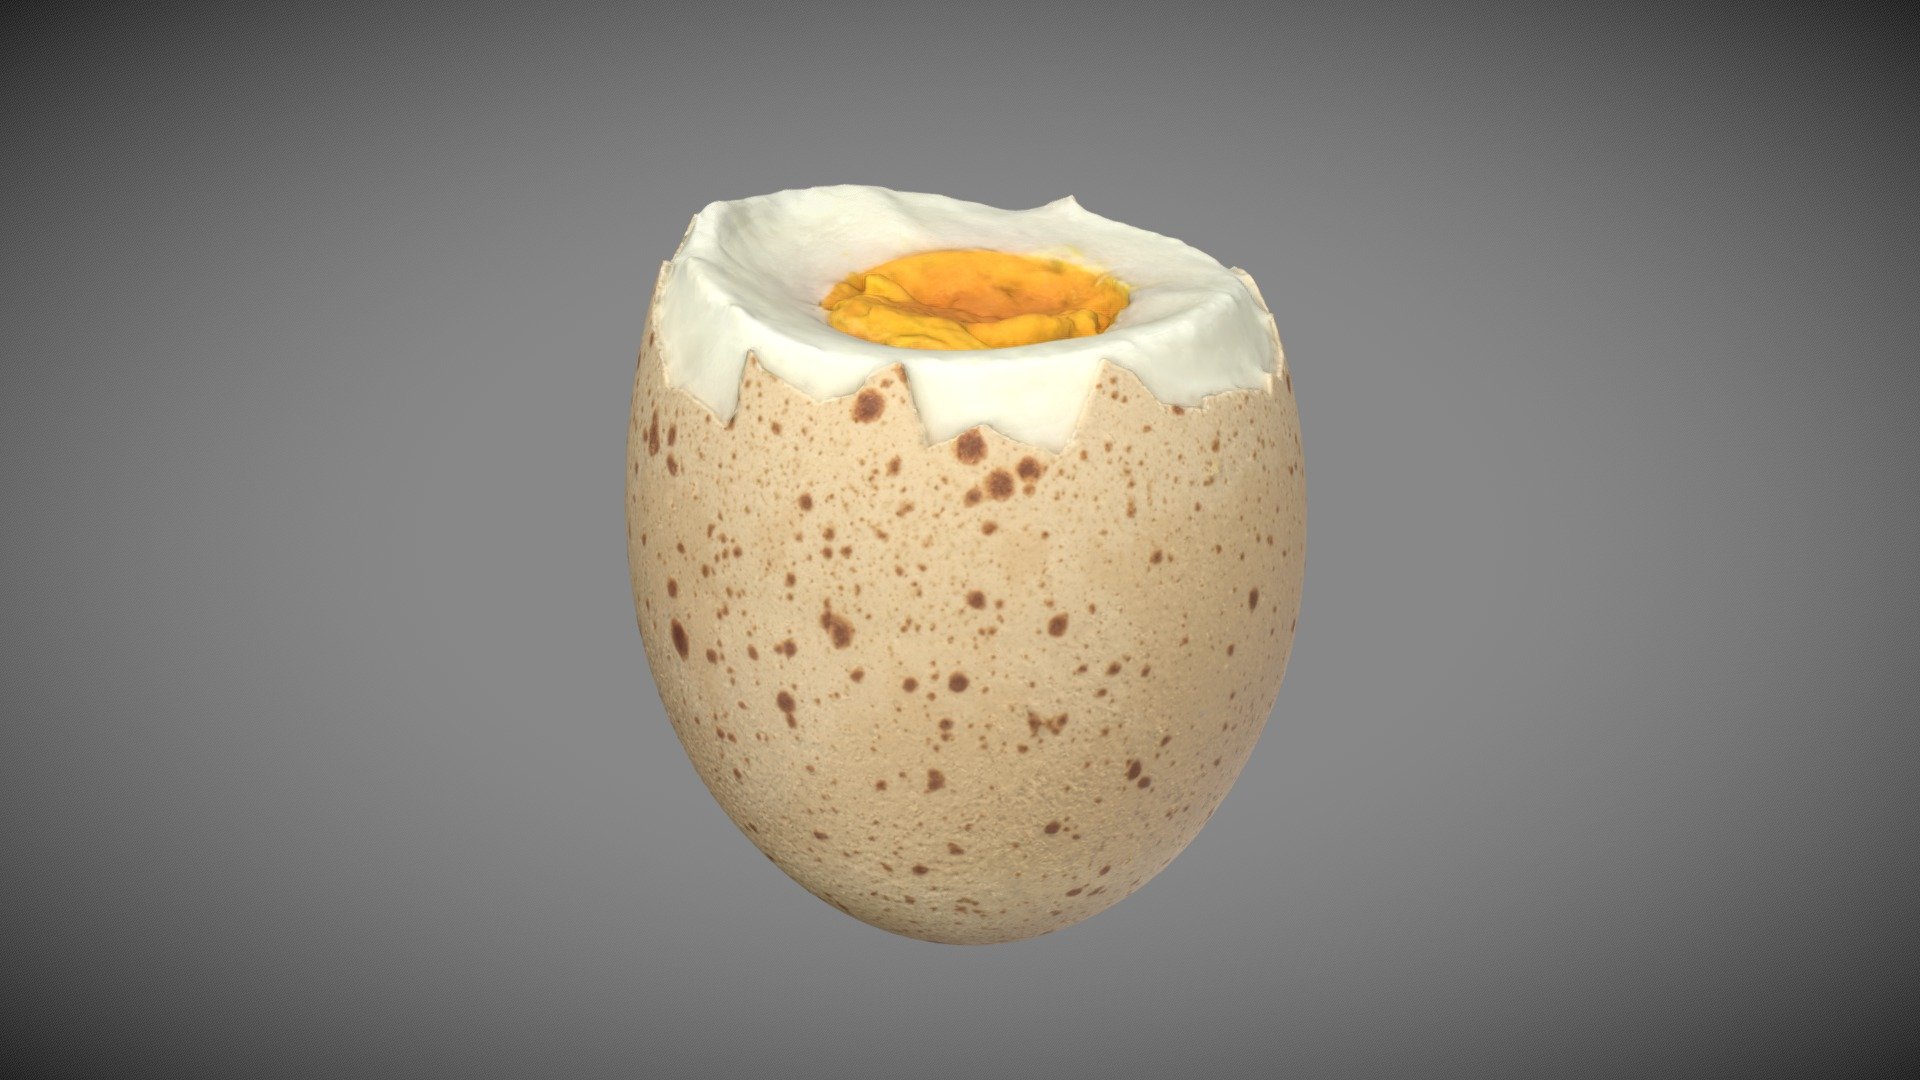 Photo scan of a cut open boiled chicken egg

https://skfb.ly/ovSDE - Boiled Egg - Buy Royalty Free 3D model by Eydeet 3d model